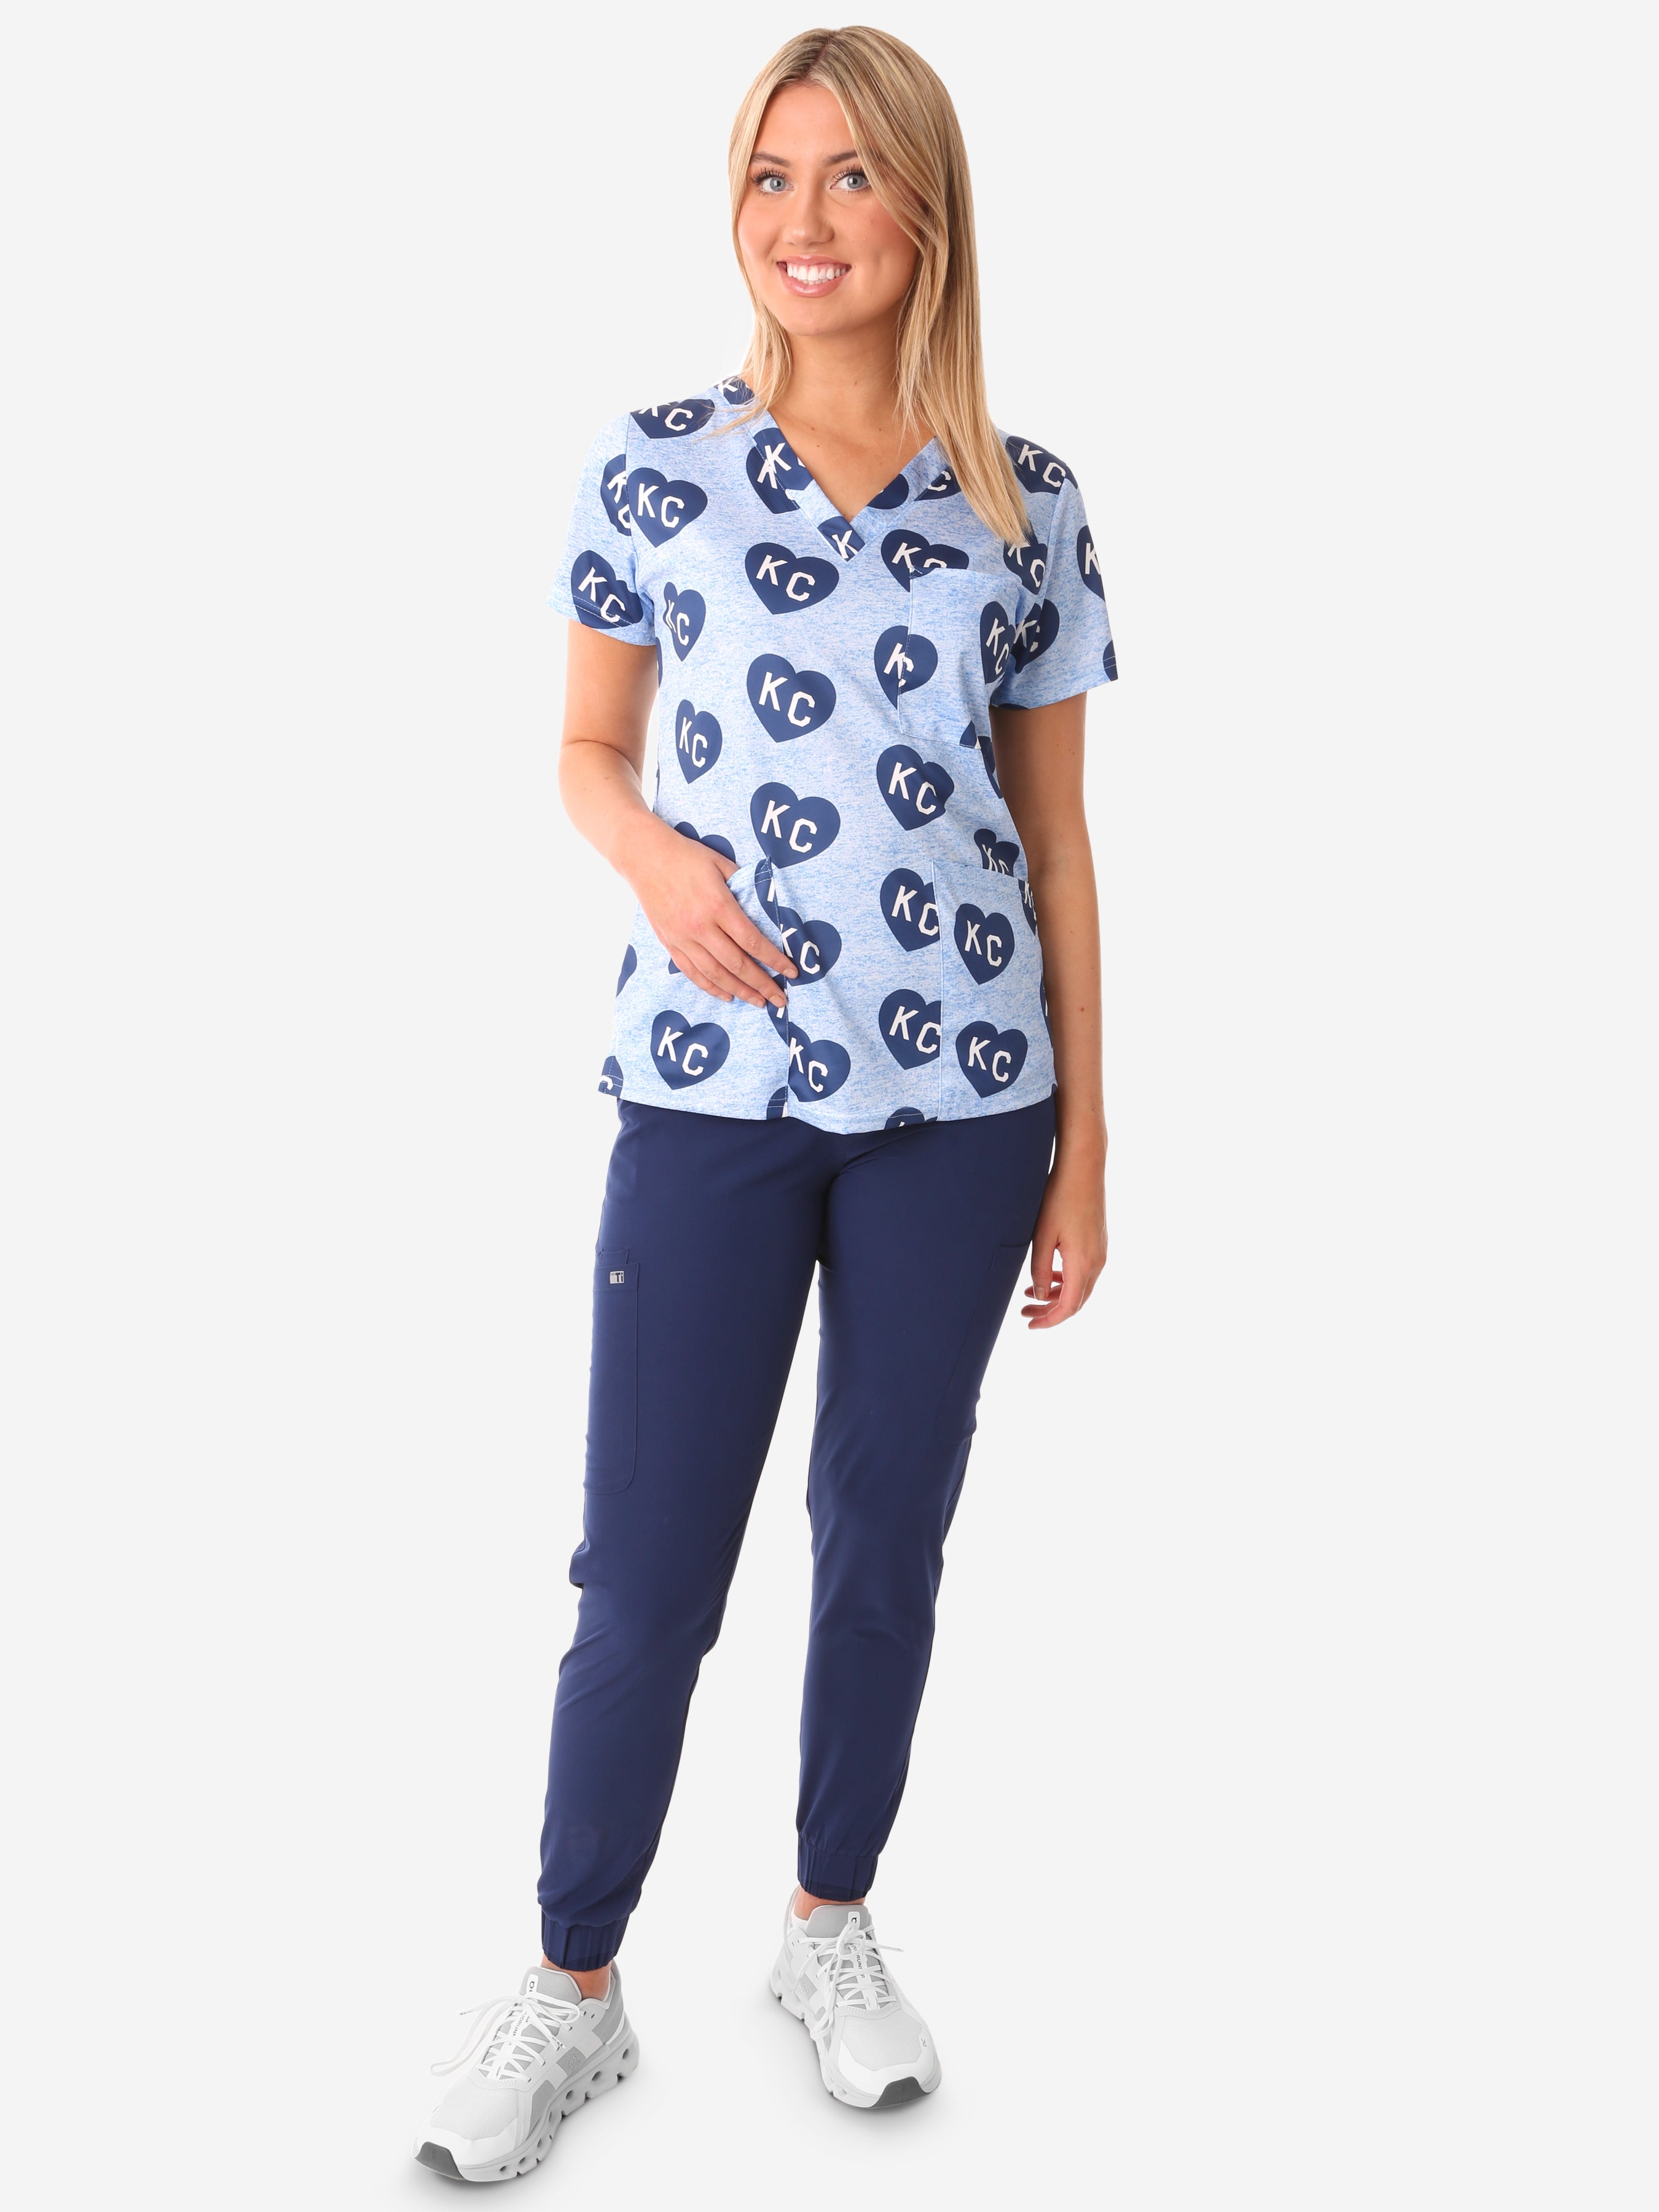 Women's Charlie Hustle Scrub Top All-Over KC Heart Design 3 Pockets with Navy Jogger Scrub Pants_Full Body_Front